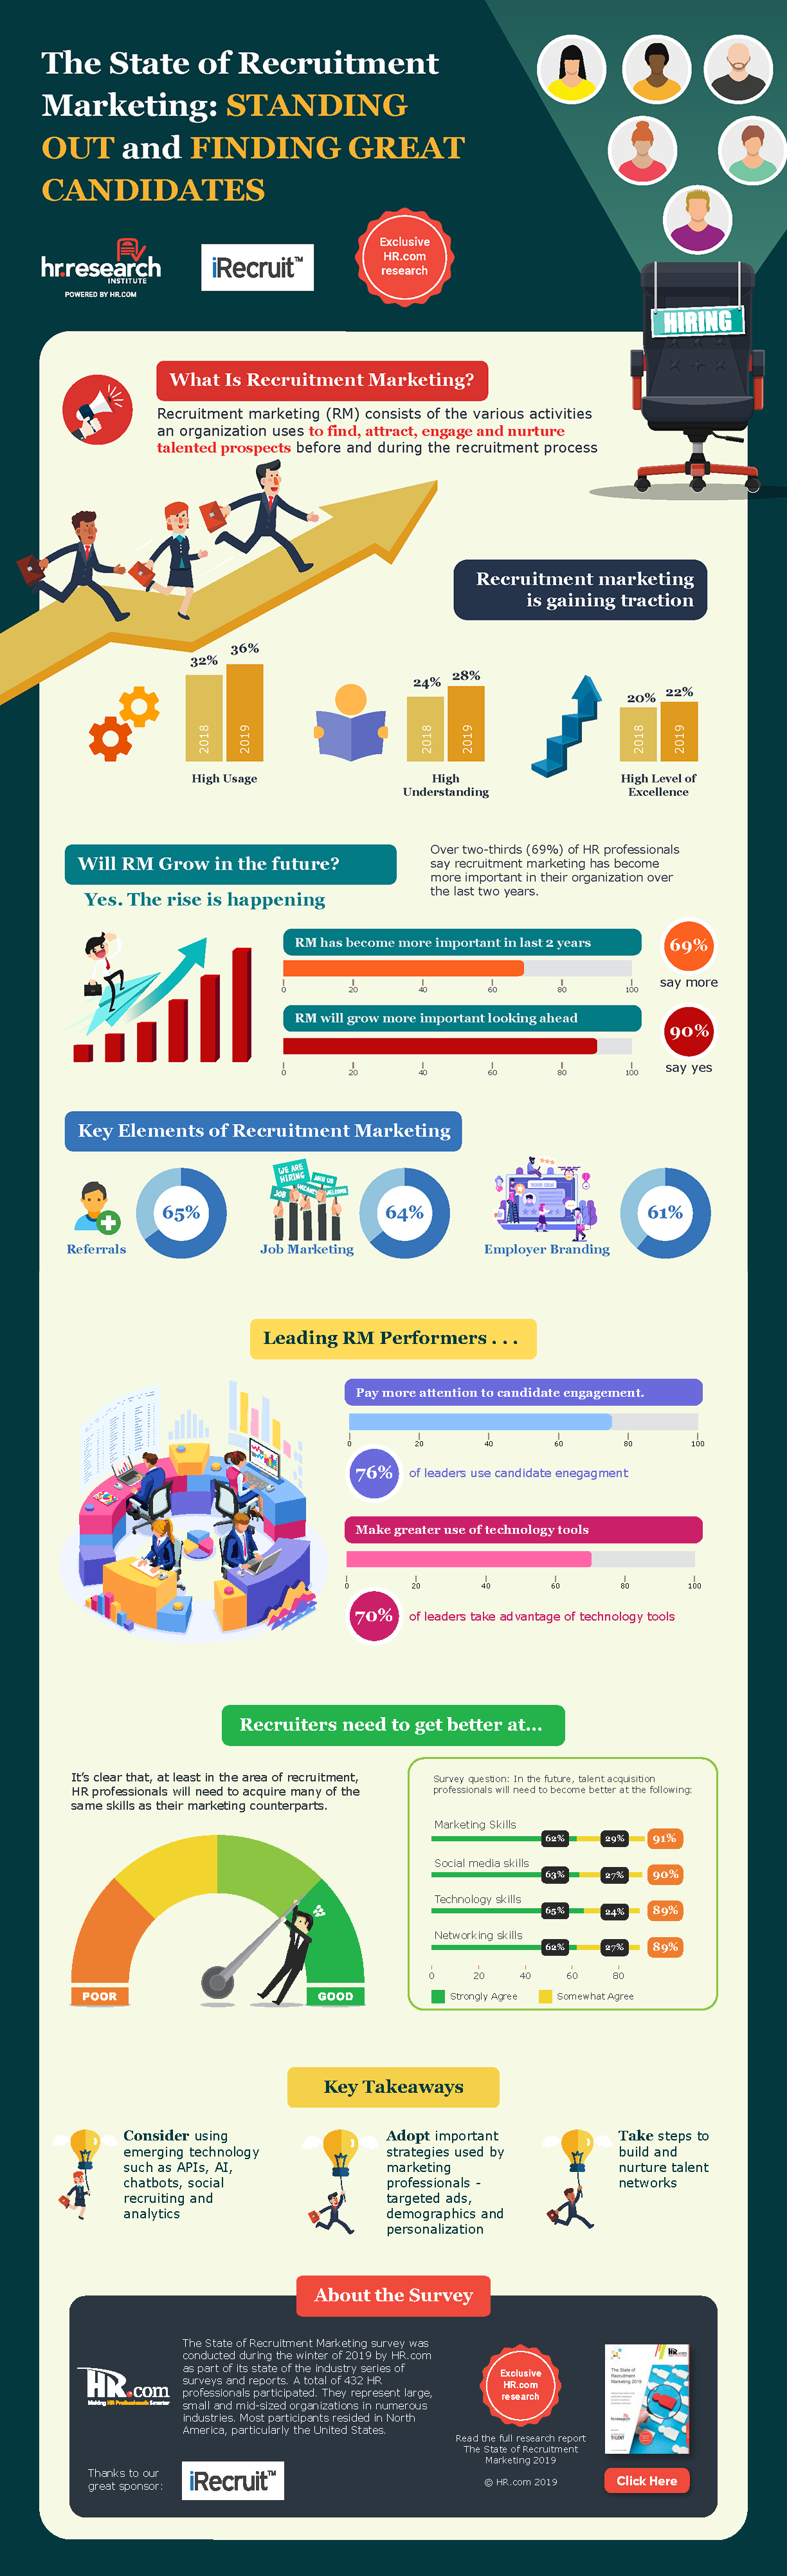 The State of Recruitment Marketing Infographic